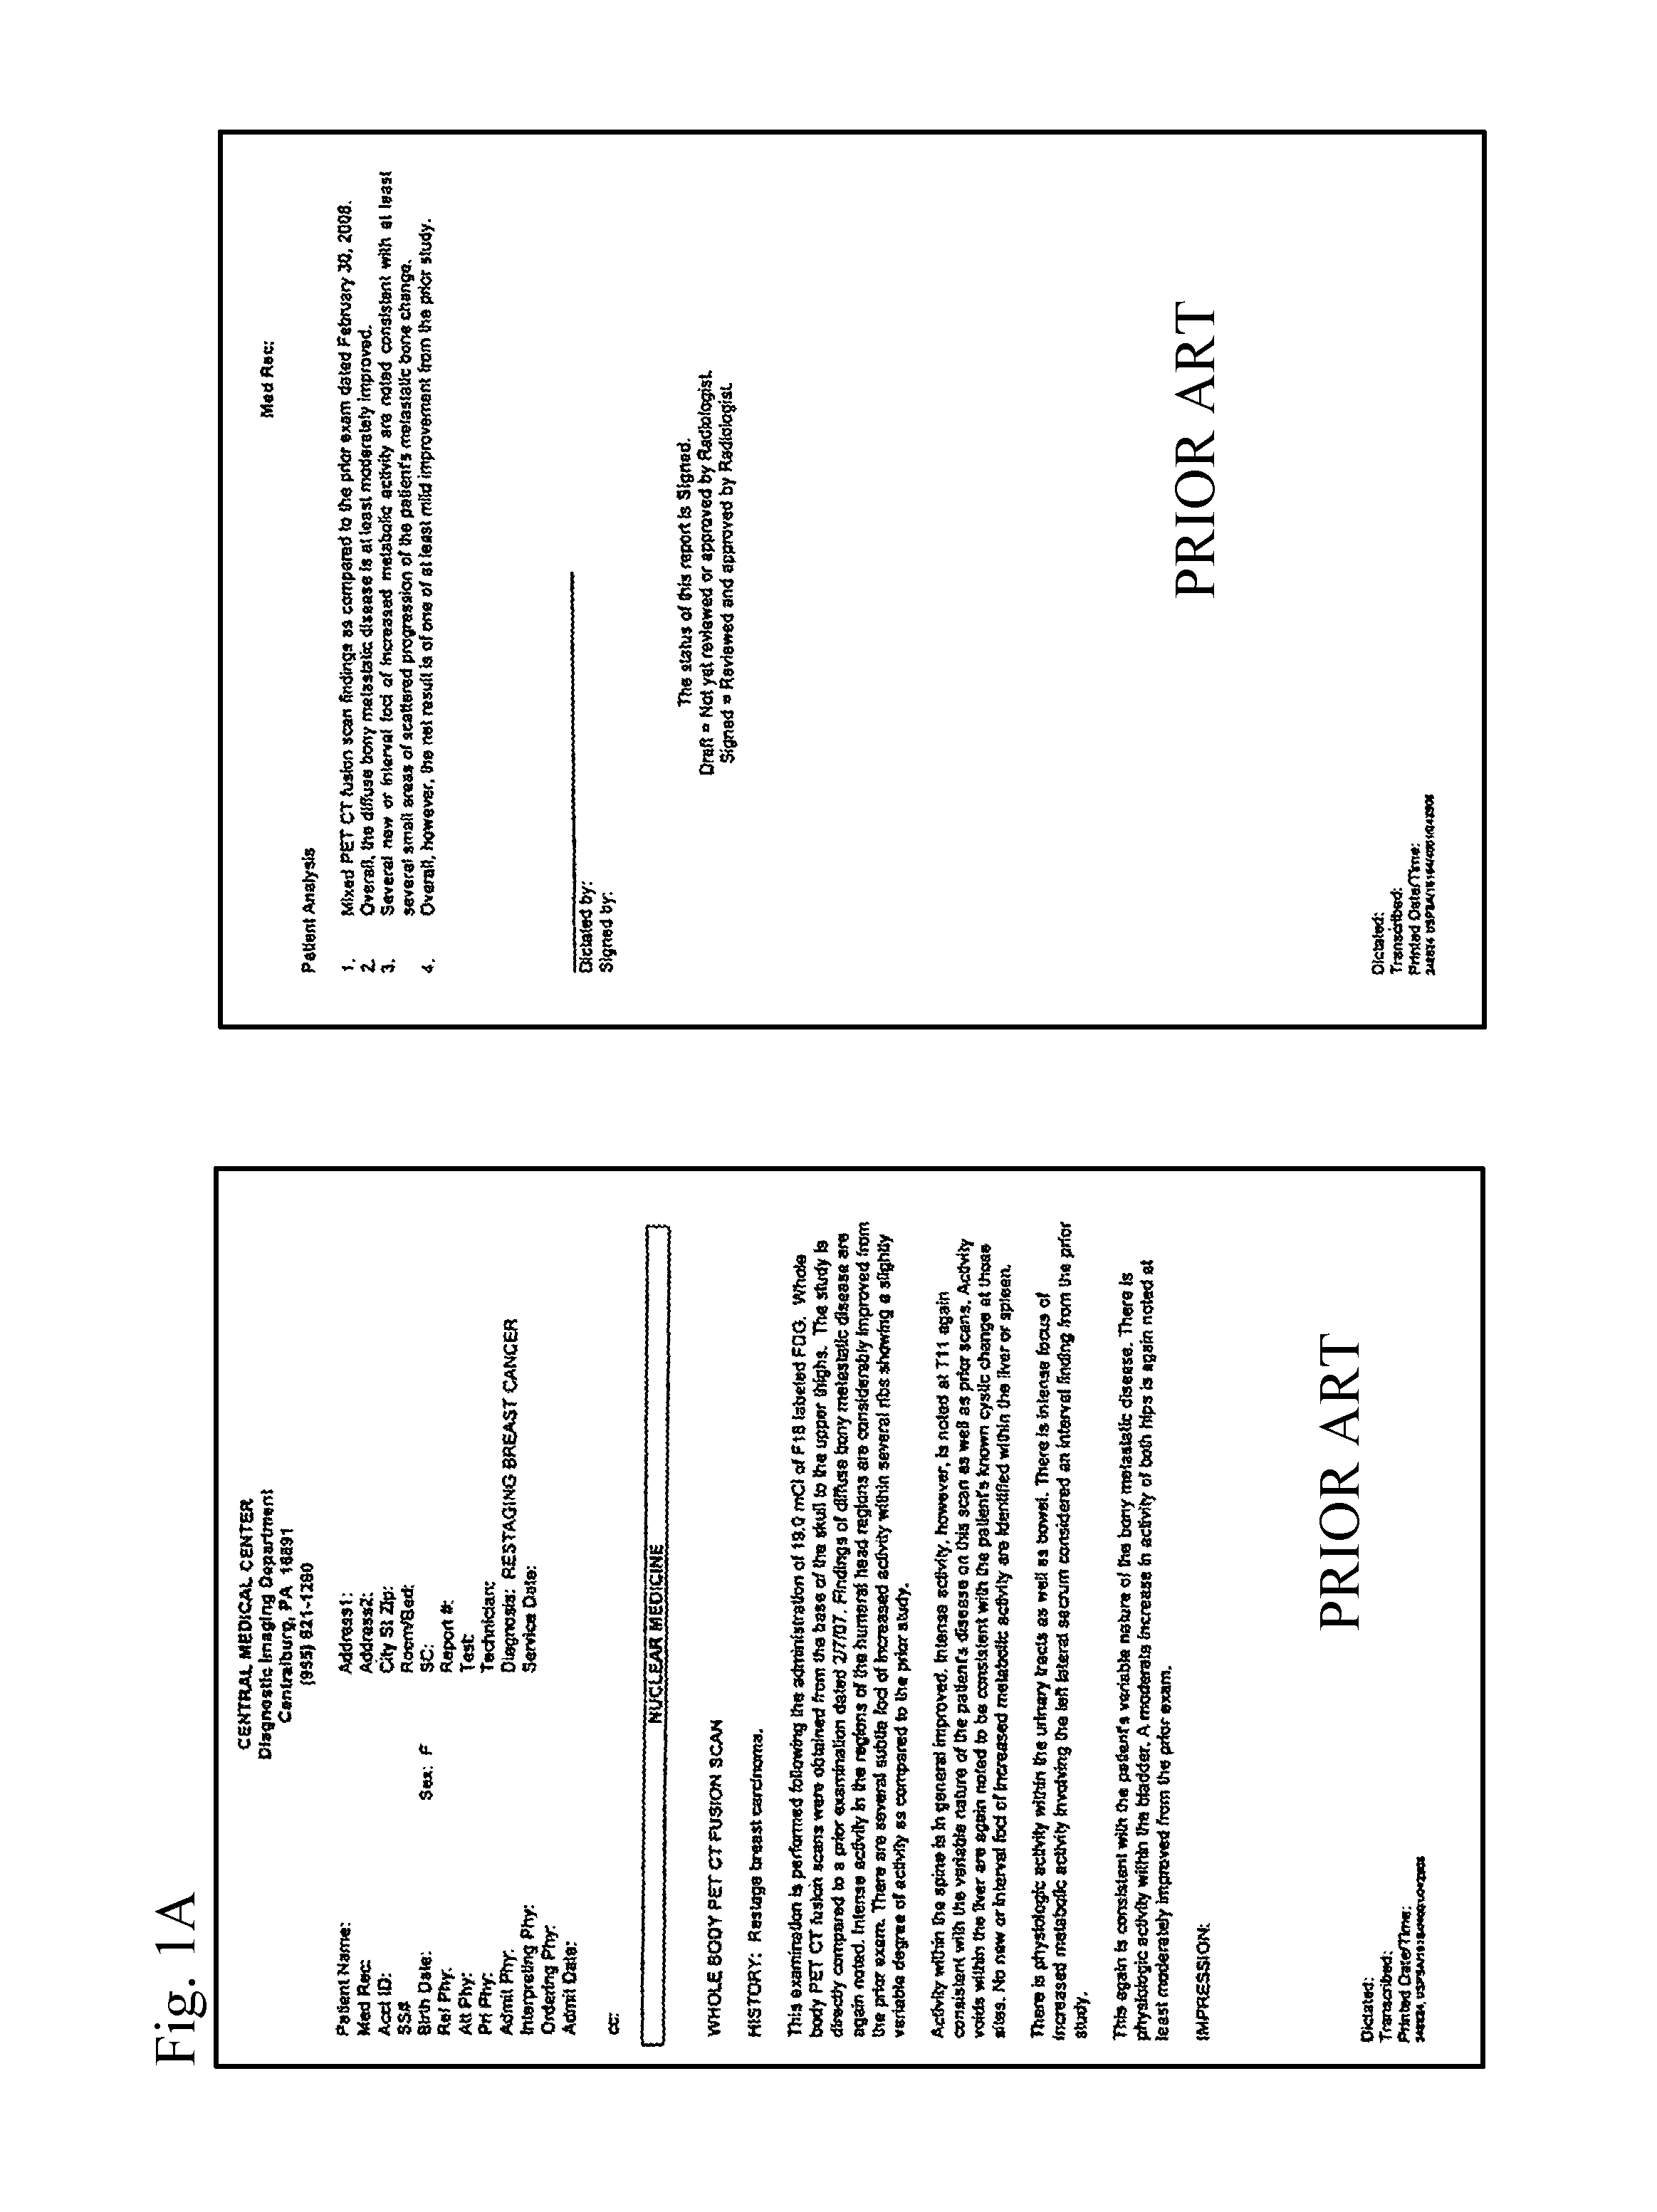 System and method for prioritization and display of aggregated data